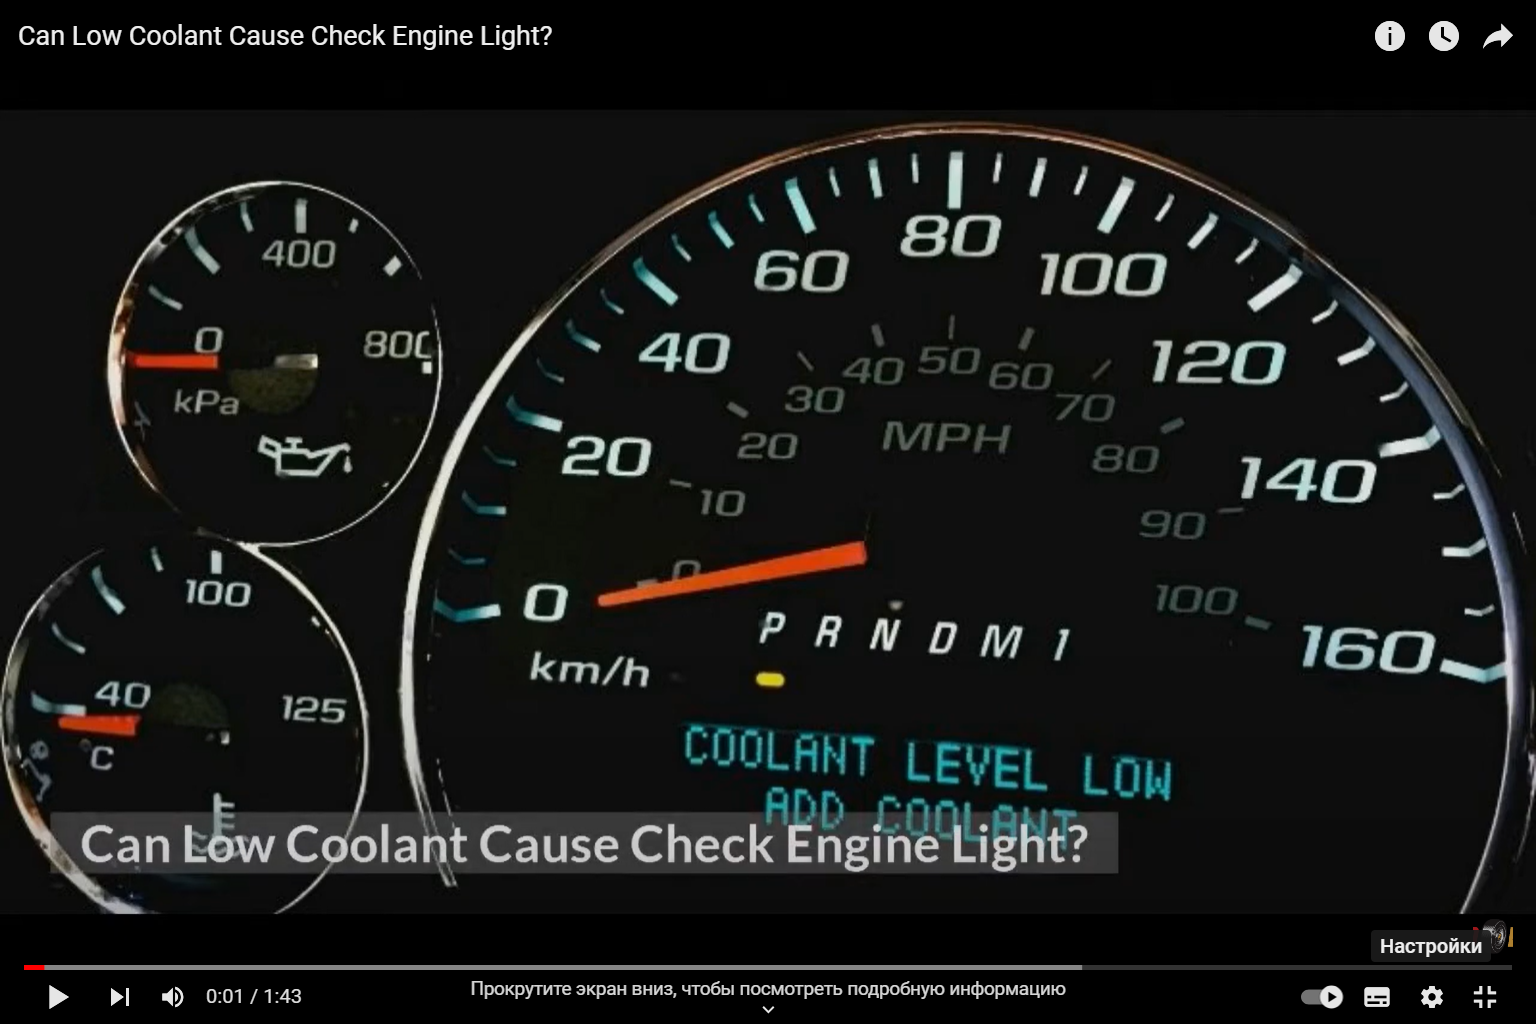 Can Check Engine Light Come On For Low Coolant?